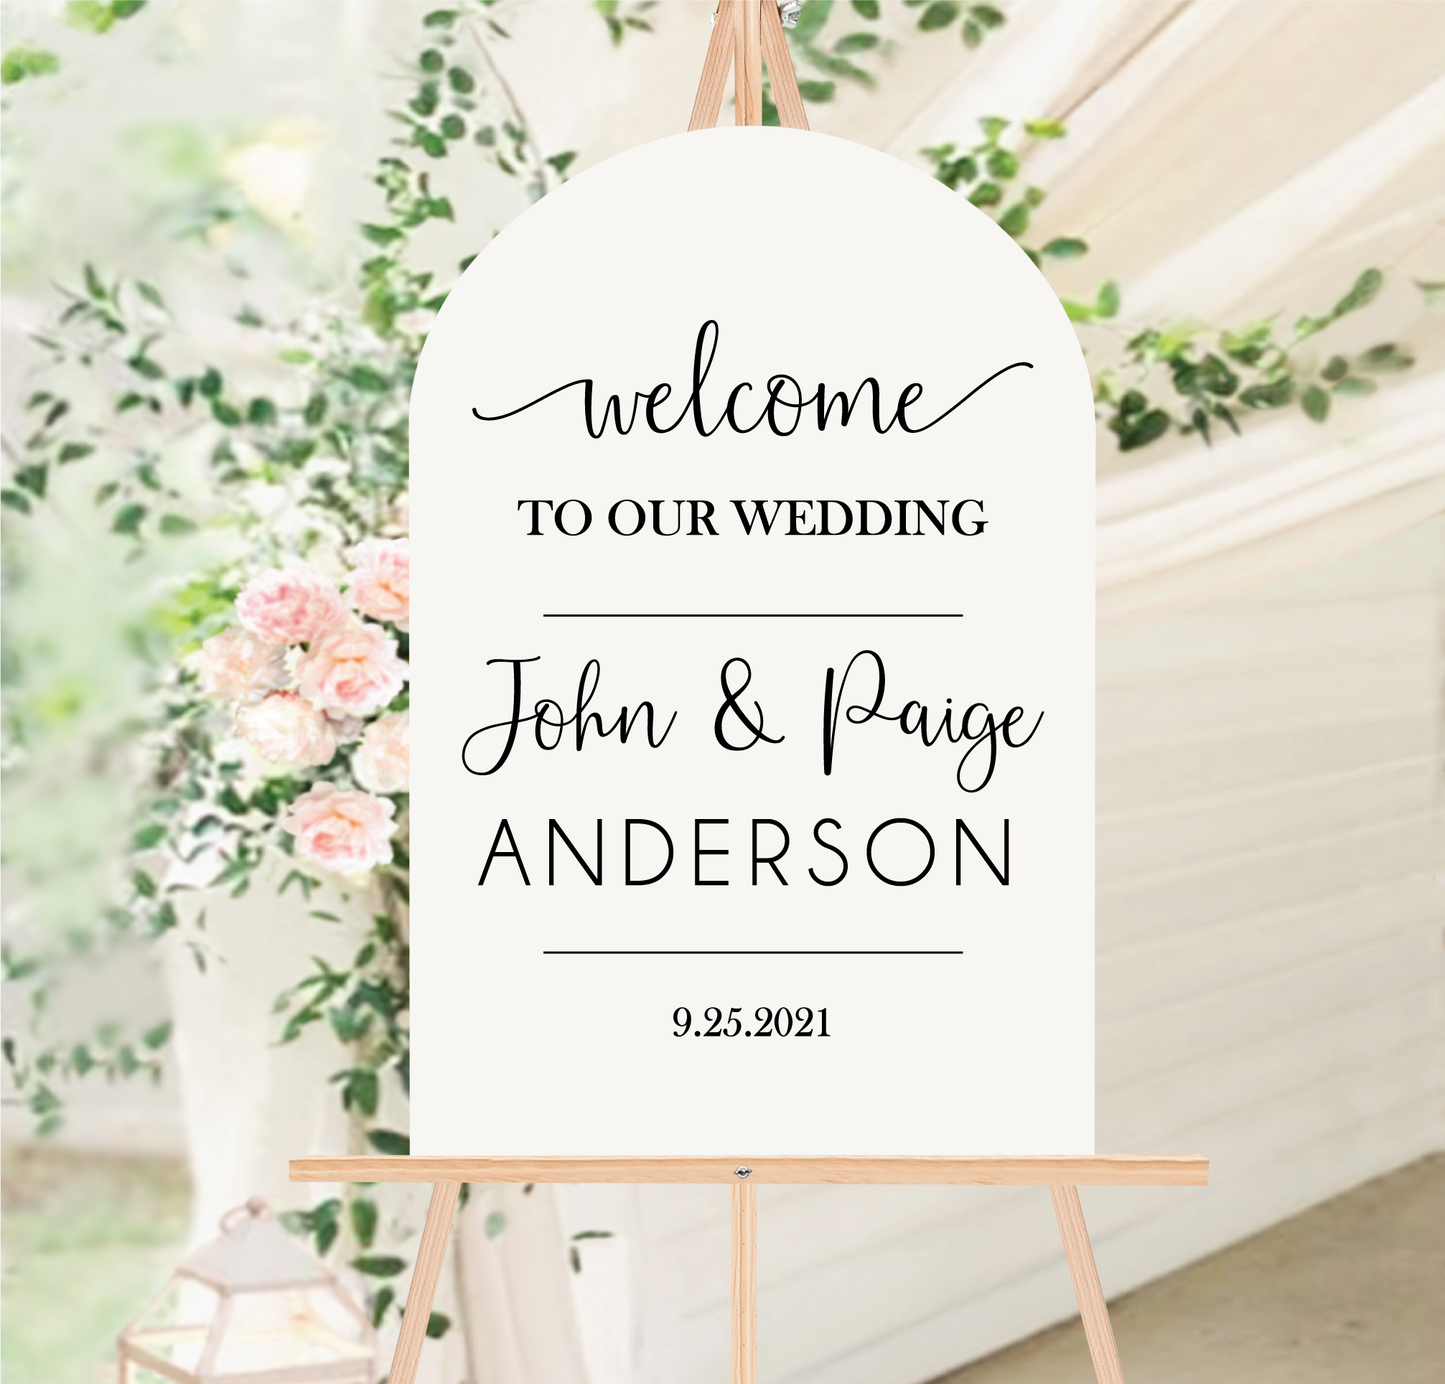 Wedding arched acrylic welcome sign - White acrylic